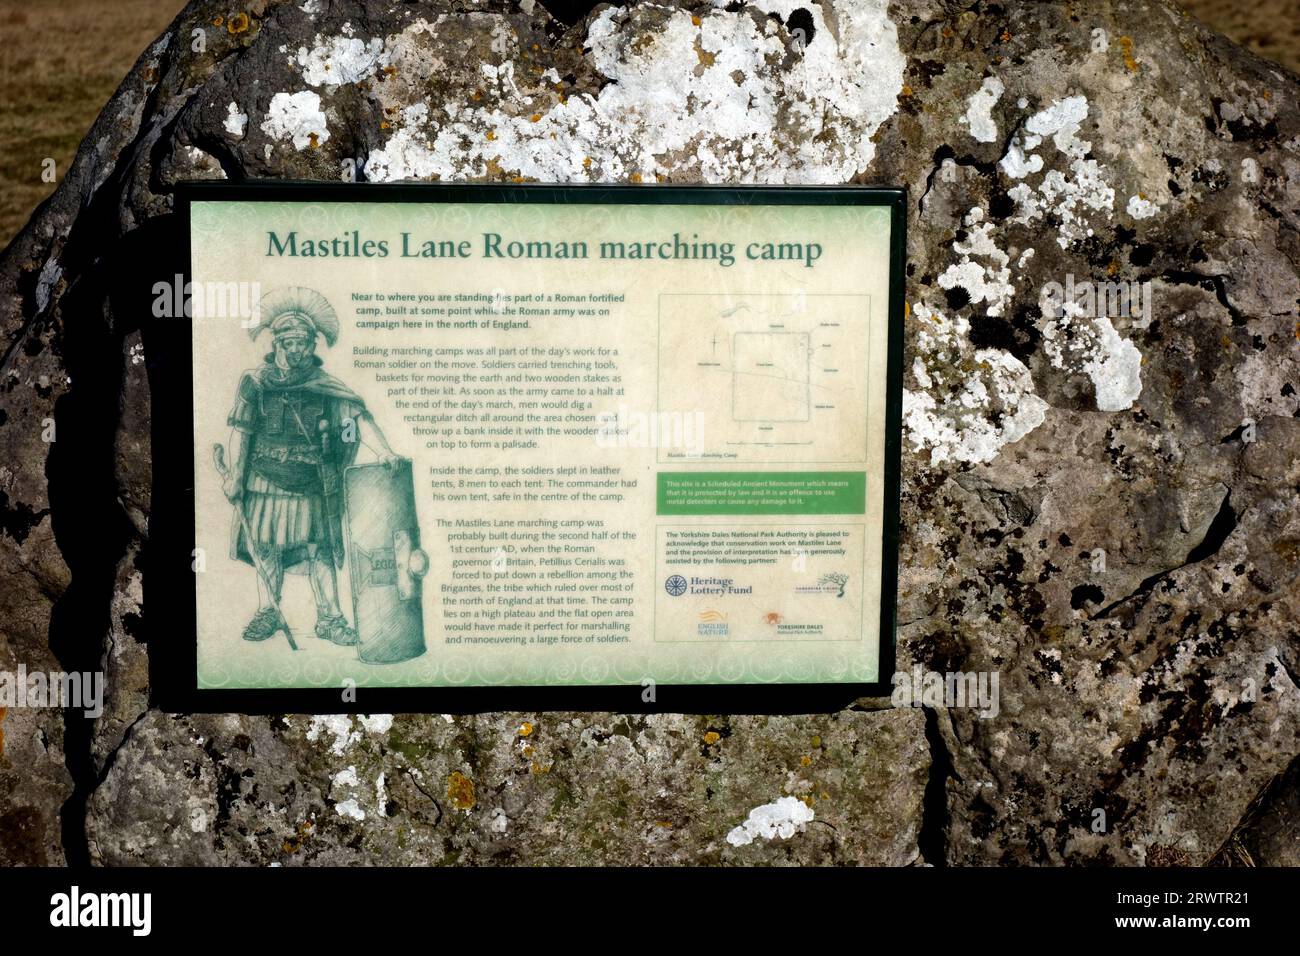 The Information Board at the Roman Camp on the Mastiles Lane an Old 'Roman Road' near Malham in the Yorkshire Dales National Park, England, UK Stock Photo